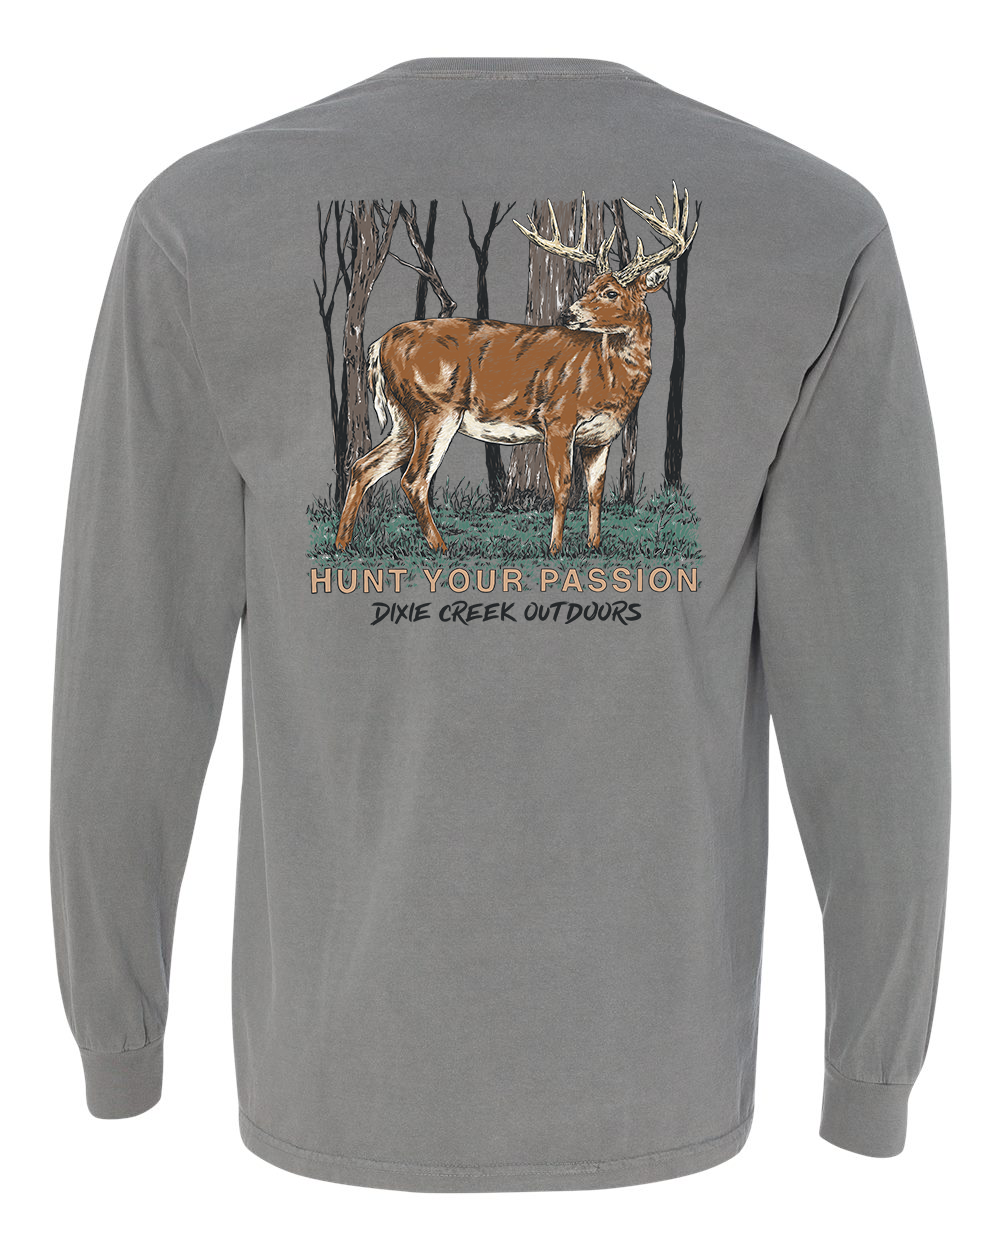 Whitetail Madness - LS Comfort Colors Pocket Tee